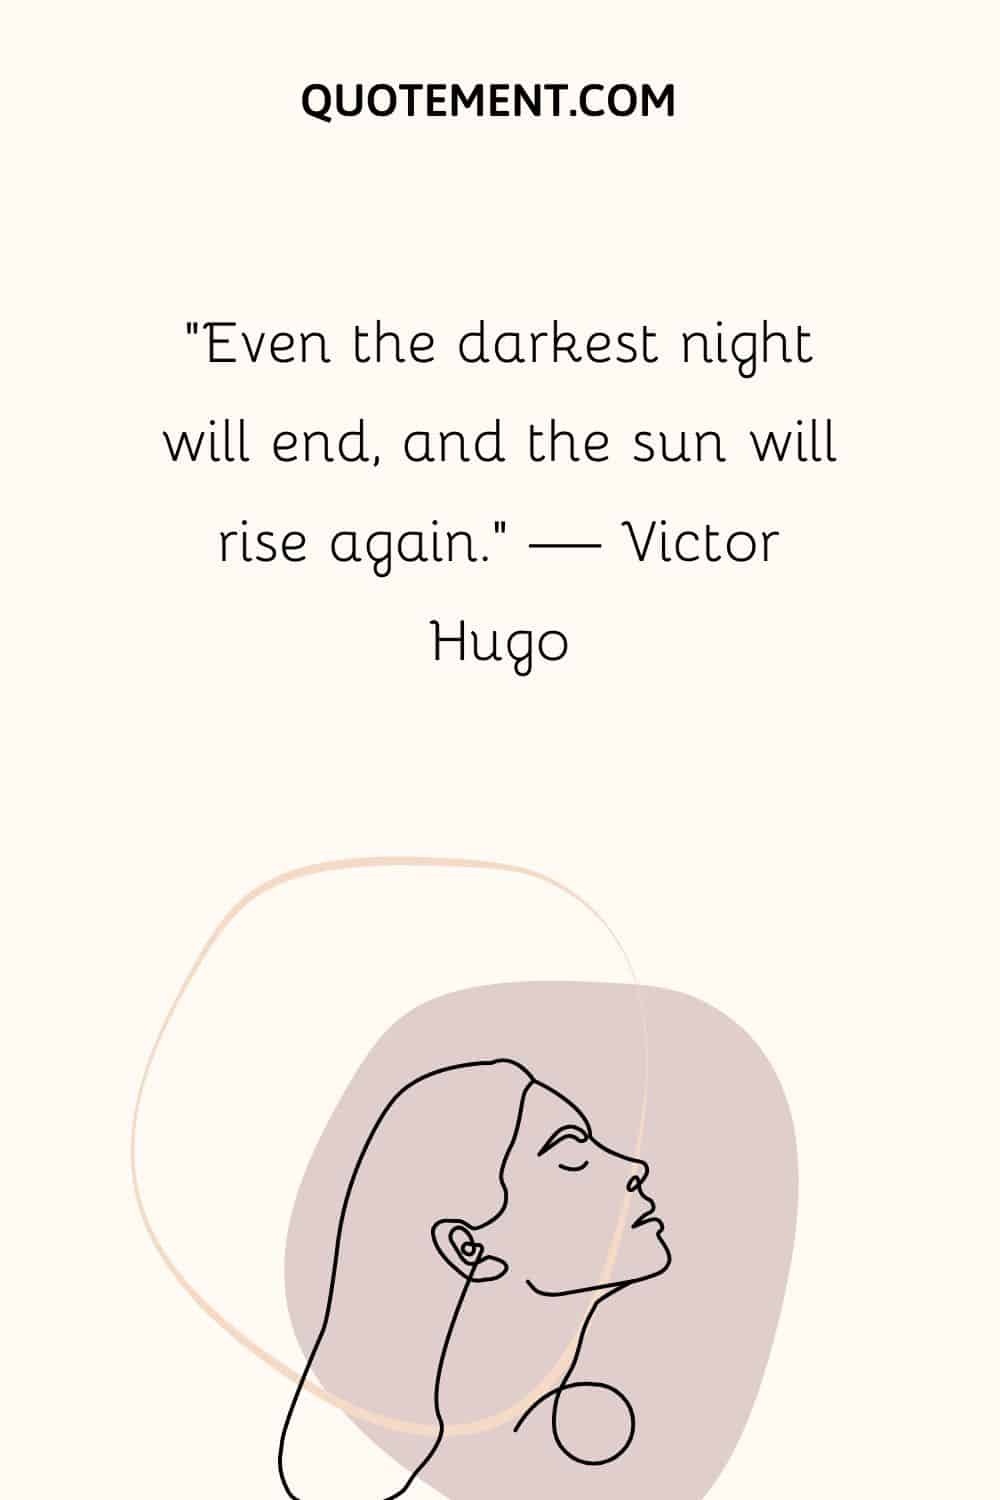 “Even the darkest night will end, and the sun will rise again.” — Victor Hugo